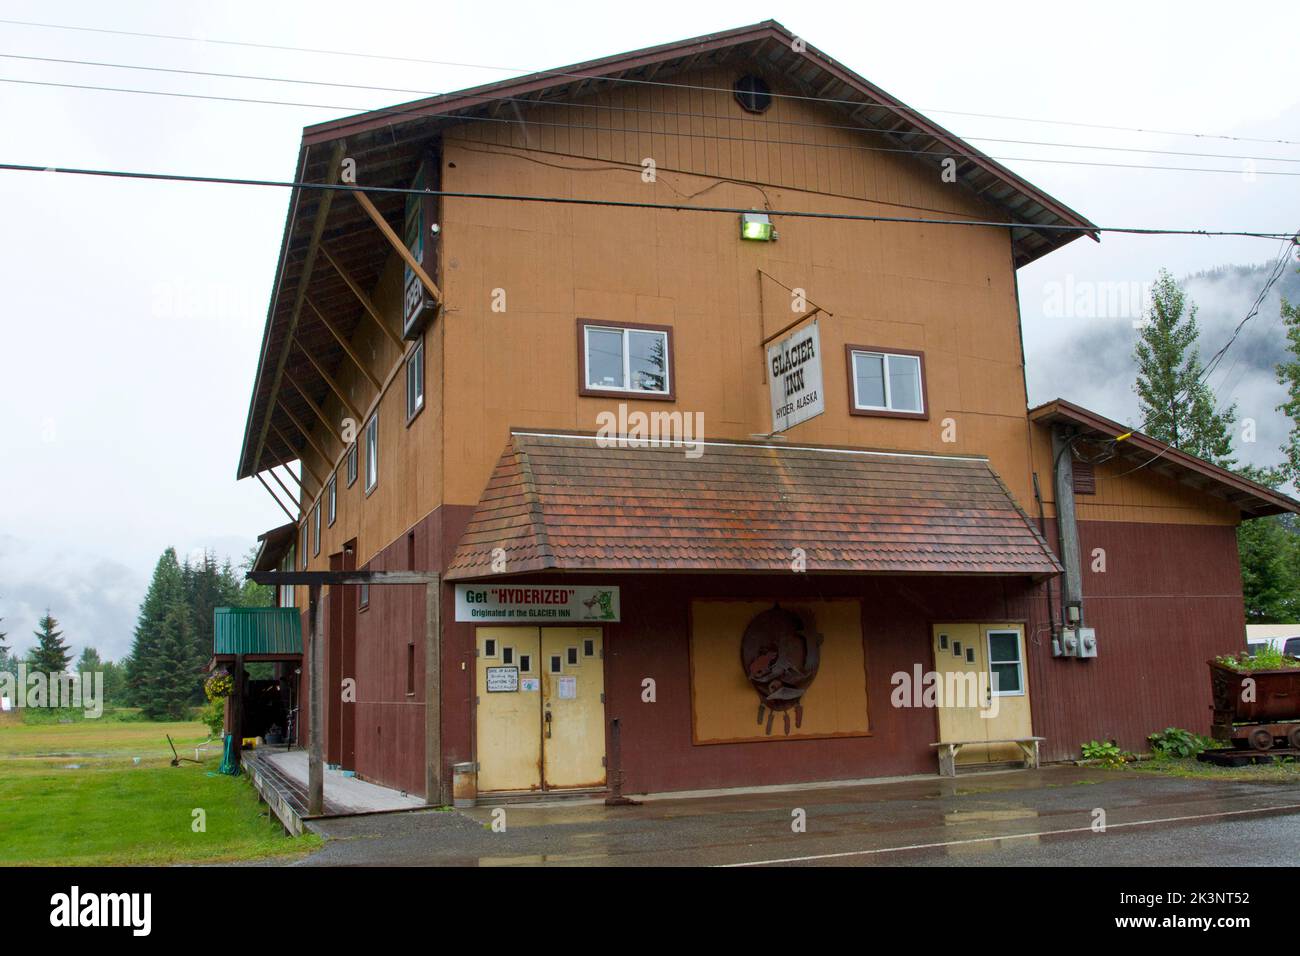 The Glacier Inn in Hyder, Alaska, USA, a famous bar for visitors to get 'Hyderized' as advertised on the outside of the building. Stock Photo